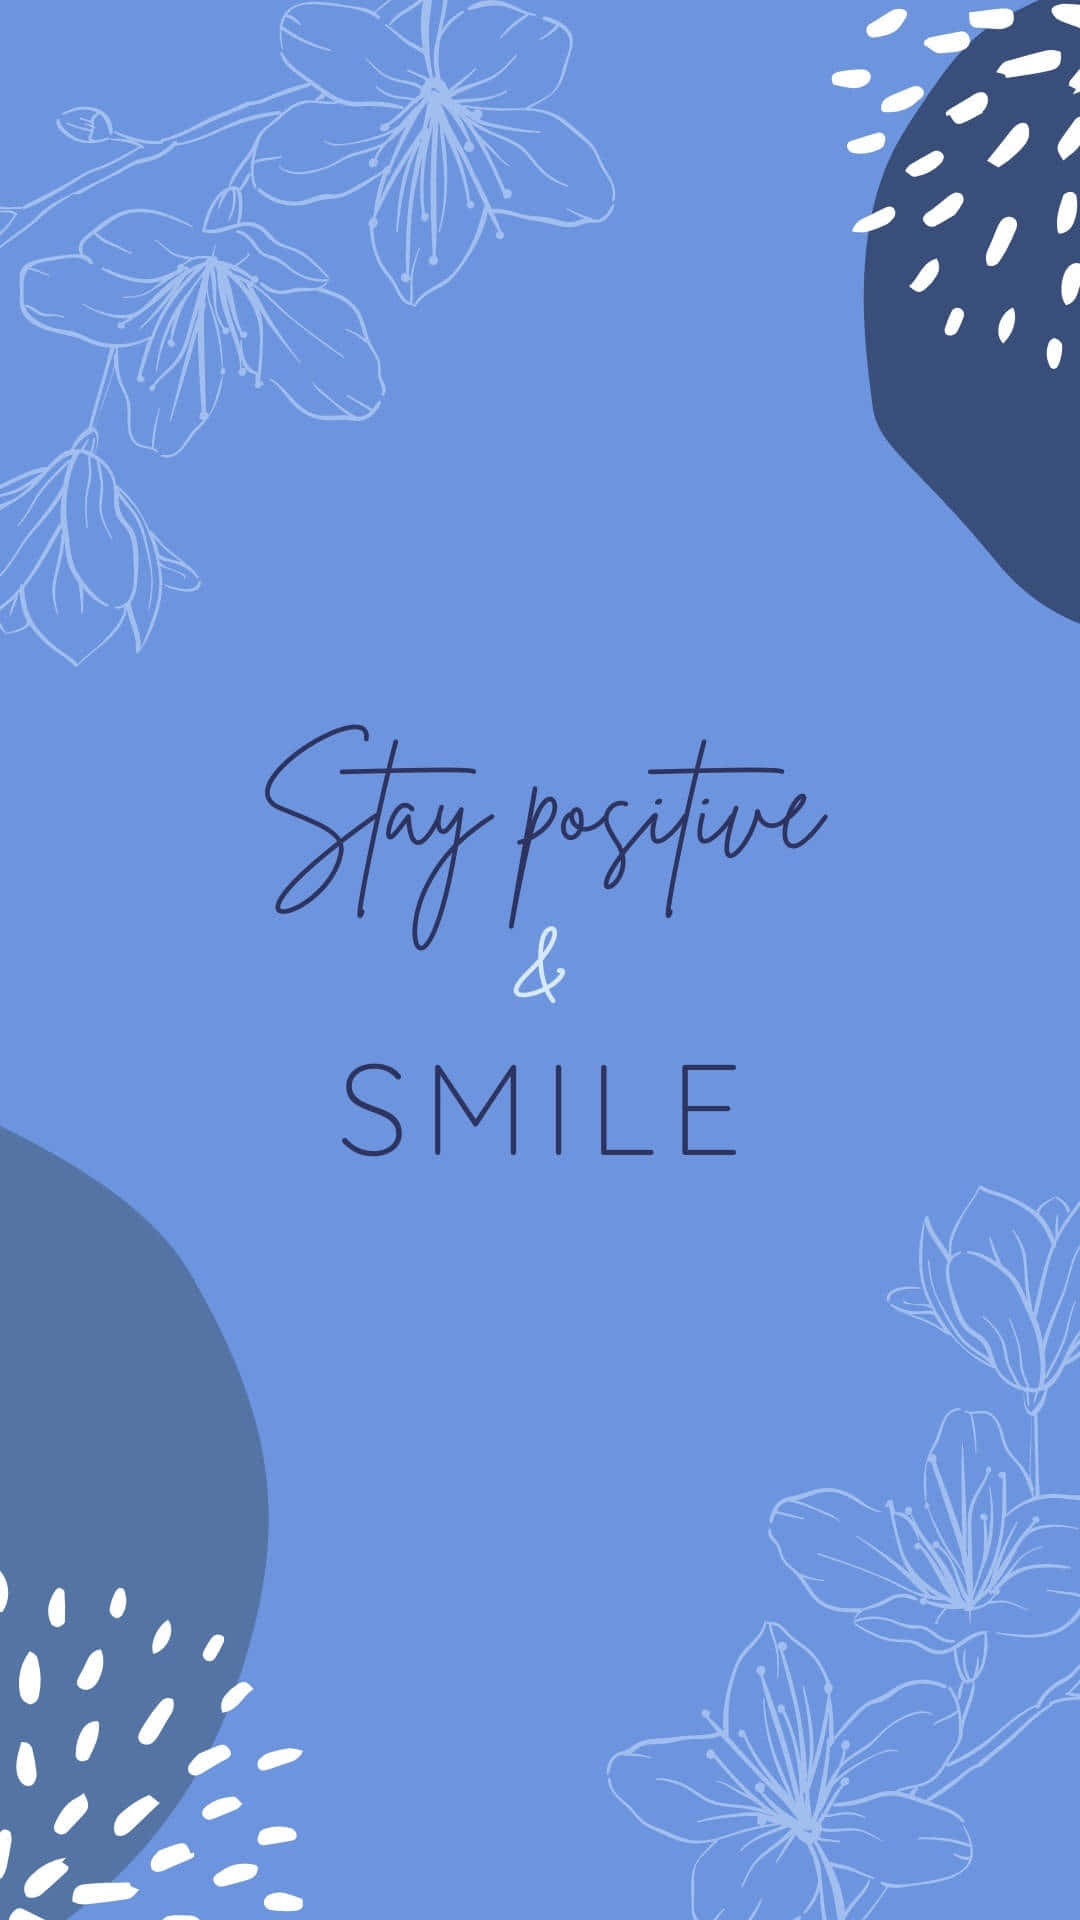 Stay Positive And Smile Inspirational Quote Aesthetic.jpg Wallpaper